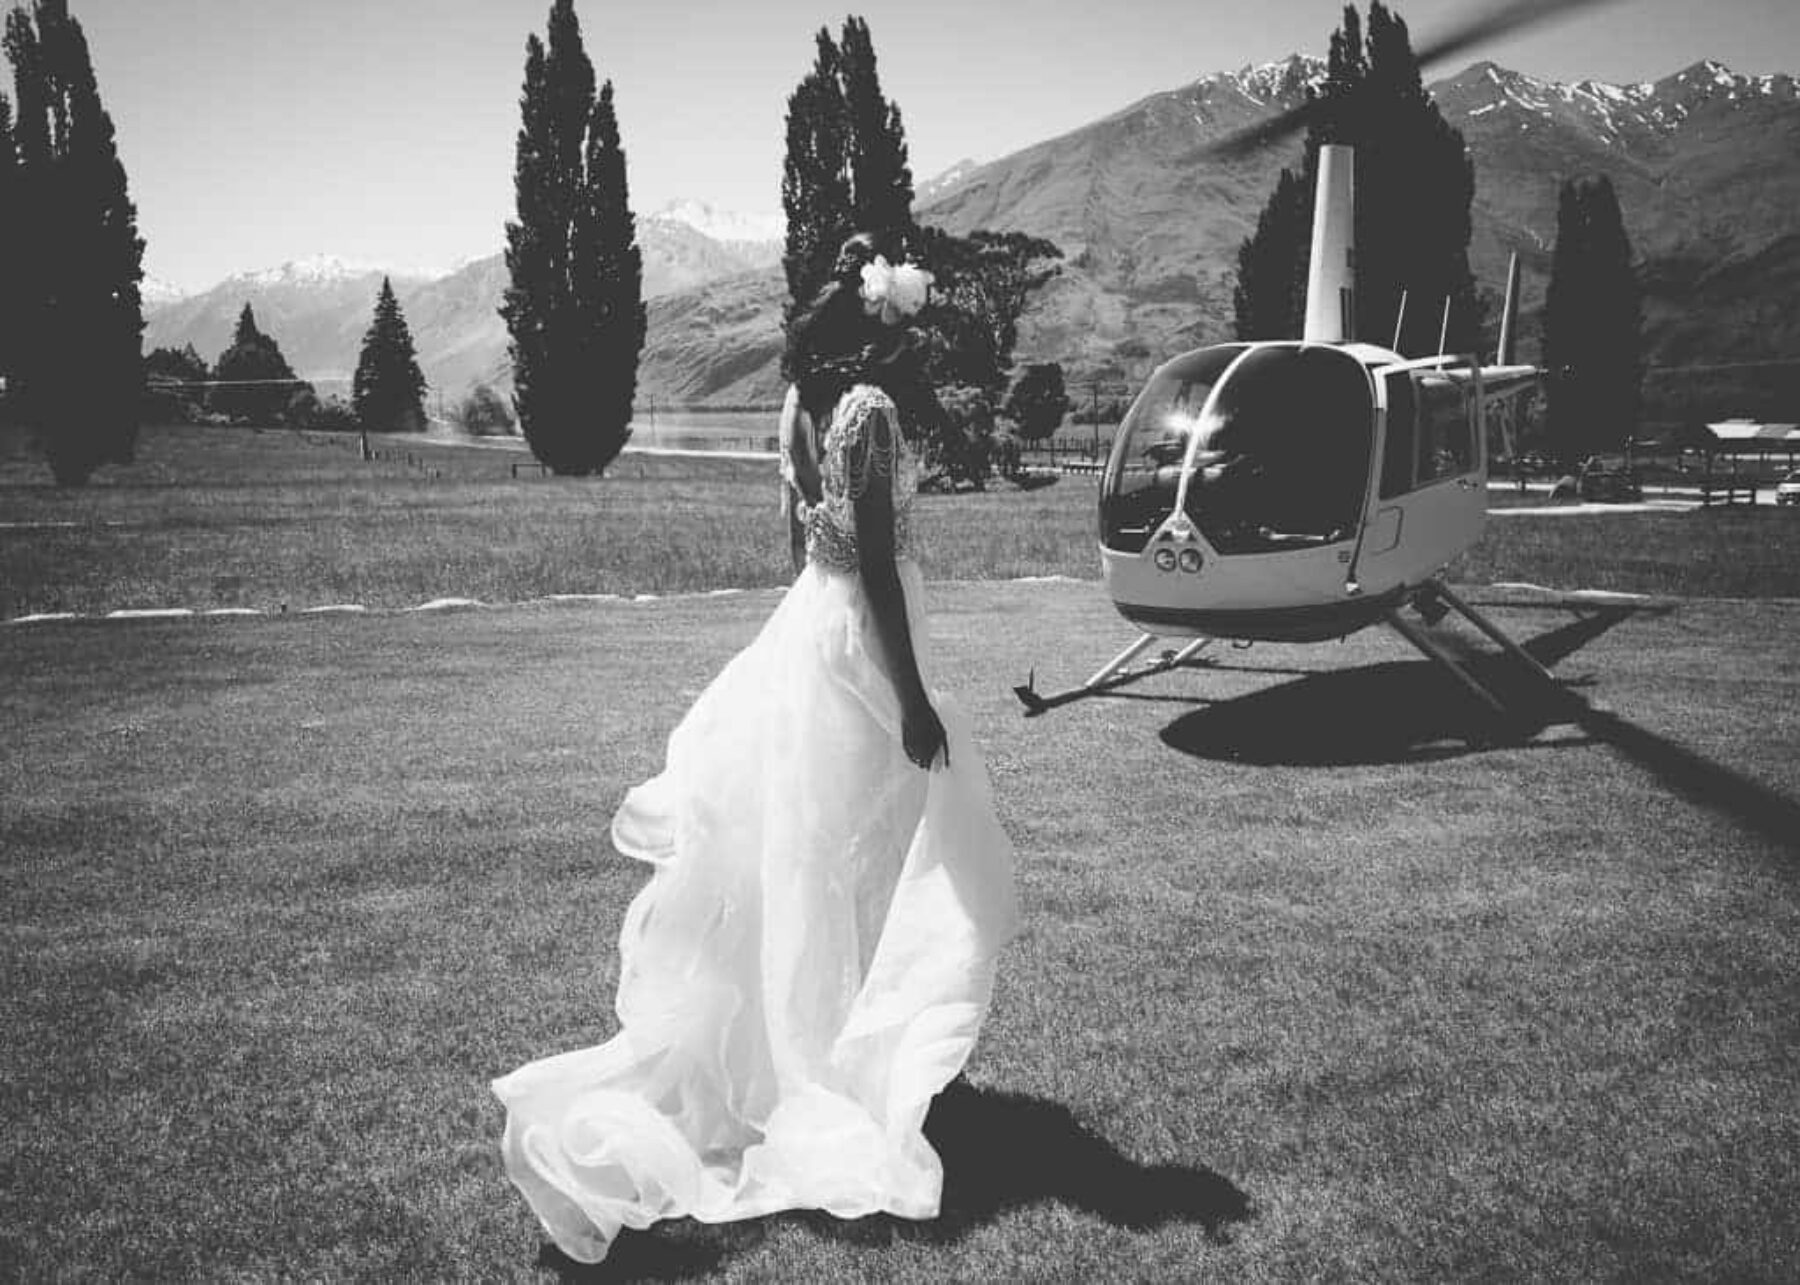 WIn a Wanaka New Zealand helicopter wedding valued at over $24,000!